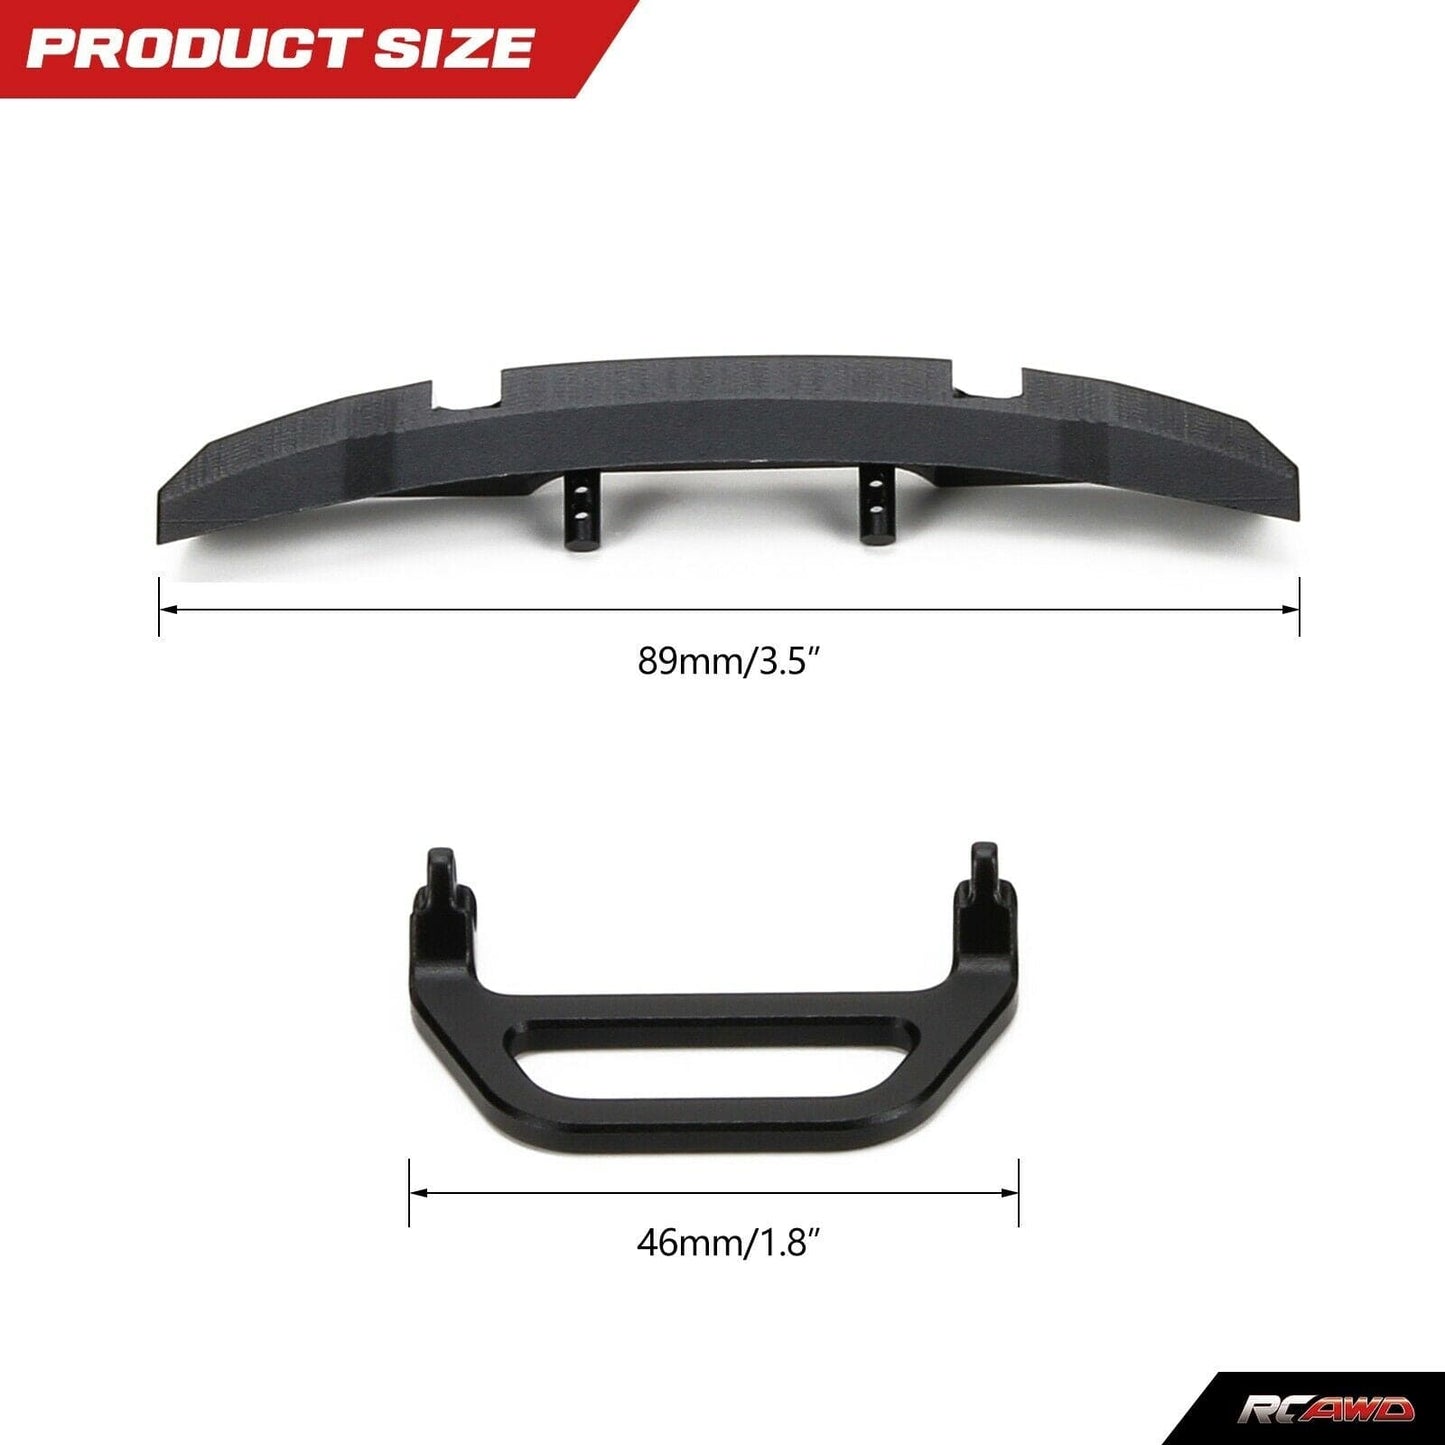 RCAWD Axial SCX24 U-shaped Front Bumper Alloy New Design - RCAWD